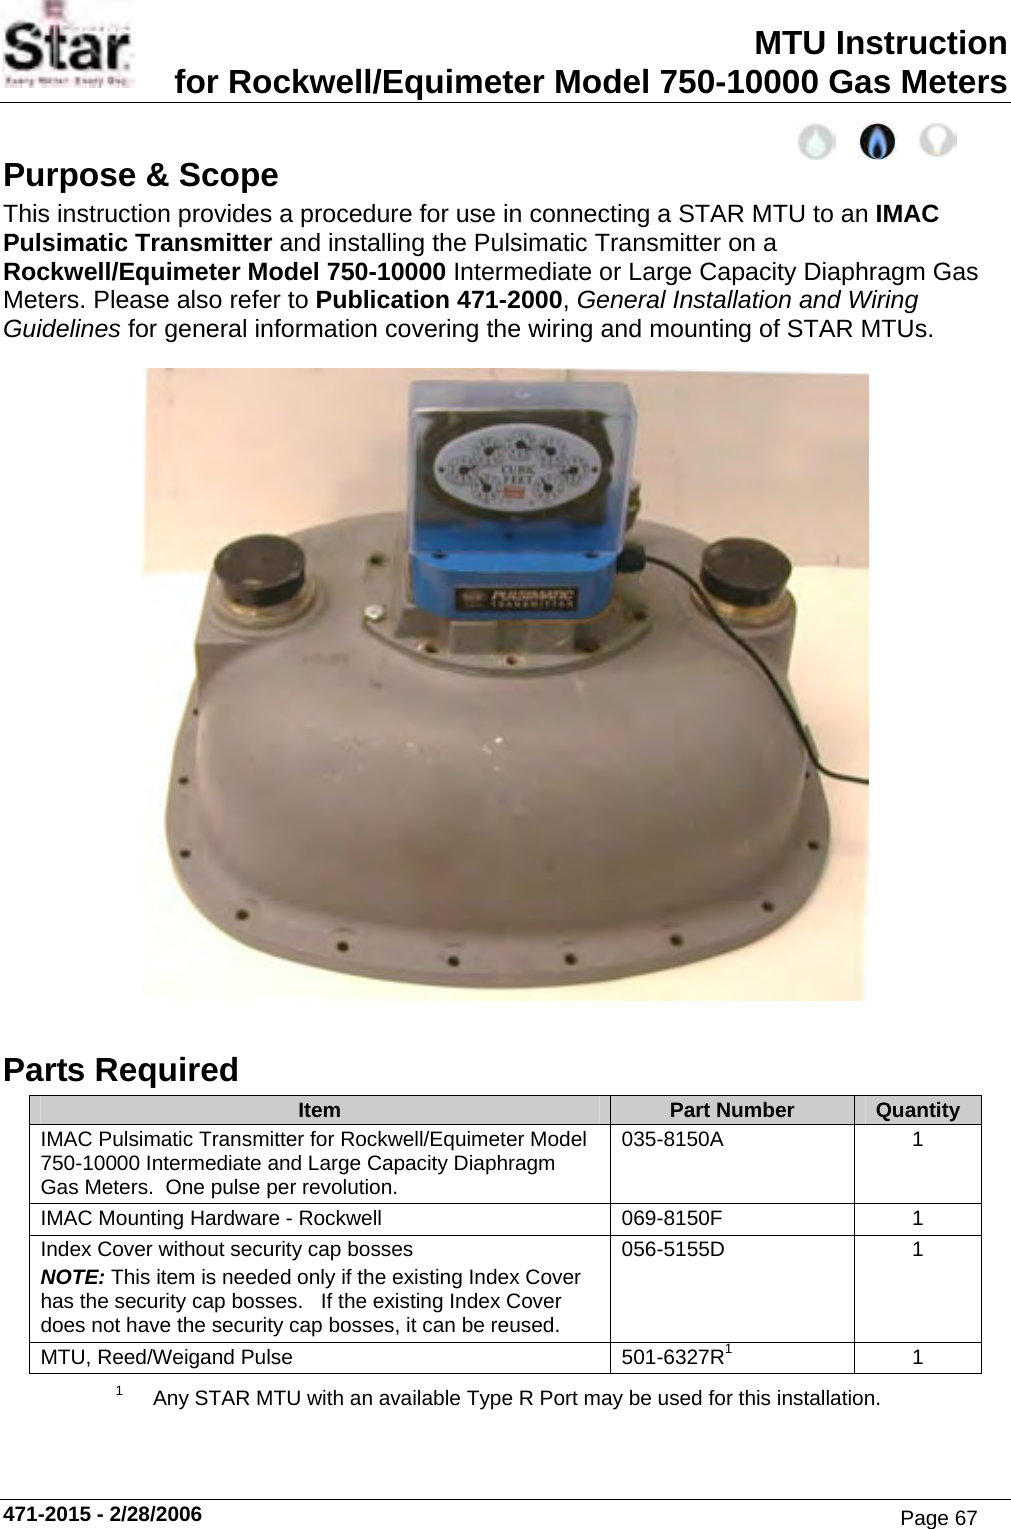 MTU Instruction for Rockwell/Equimeter Model 750-10000 Gas Meters Purpose &amp; Scope This instruction provides a procedure for use in connecting a STAR MTU to an IMAC Pulsimatic Transmitter and installing the Pulsimatic Transmitter on a Rockwell/Equimeter Model 750-10000 Intermediate or Large Capacity Diaphragm Gas Meters. Please also refer to Publication 471-2000, General Installation and Wiring Guidelines for general information covering the wiring and mounting of STAR MTUs.  Parts Required Item  Part Number  Quantity IMAC Pulsimatic Transmitter for Rockwell/Equimeter Model 750-10000 Intermediate and Large Capacity Diaphragm Gas Meters.  One pulse per revolution. 035-8150A 1 IMAC Mounting Hardware - Rockwell  069-8150F  1 Index Cover without security cap bosses NOTE: This item is needed only if the existing Index Cover has the security cap bosses.   If the existing Index Cover does not have the security cap bosses, it can be reused. 056-5155D 1 MTU, Reed/Weigand Pulse  501-6327R11 1  Any STAR MTU with an available Type R Port may be used for this installation.  471-2015 - 2/28/2006 Page 67